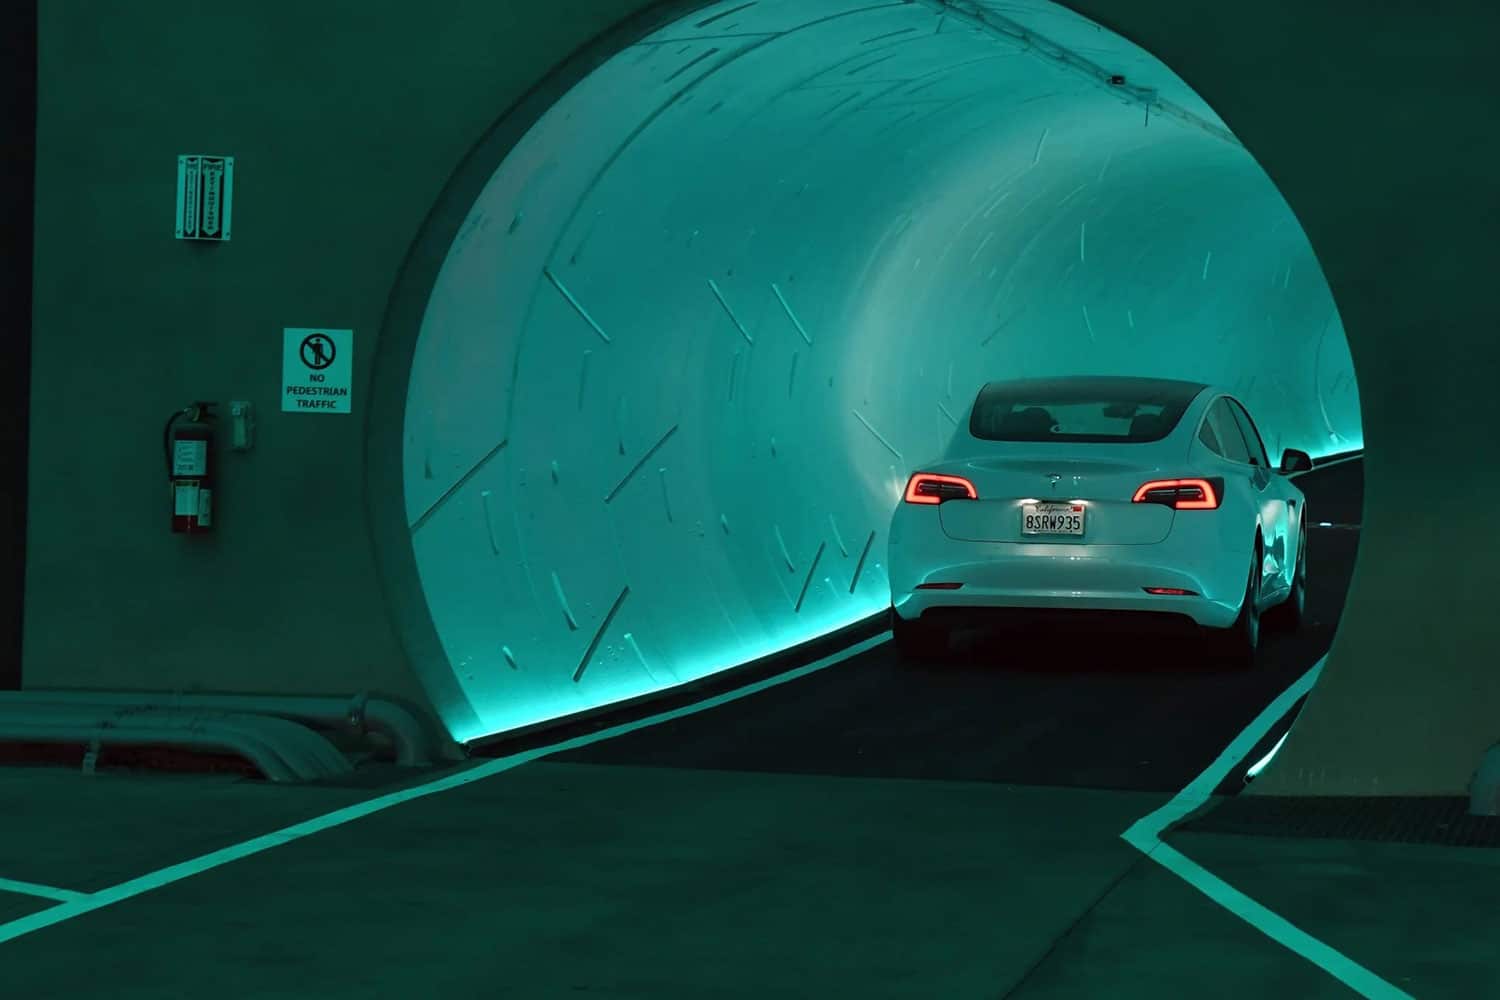 The Boring Company gets approval to expand tunnel network in Las Vegas.